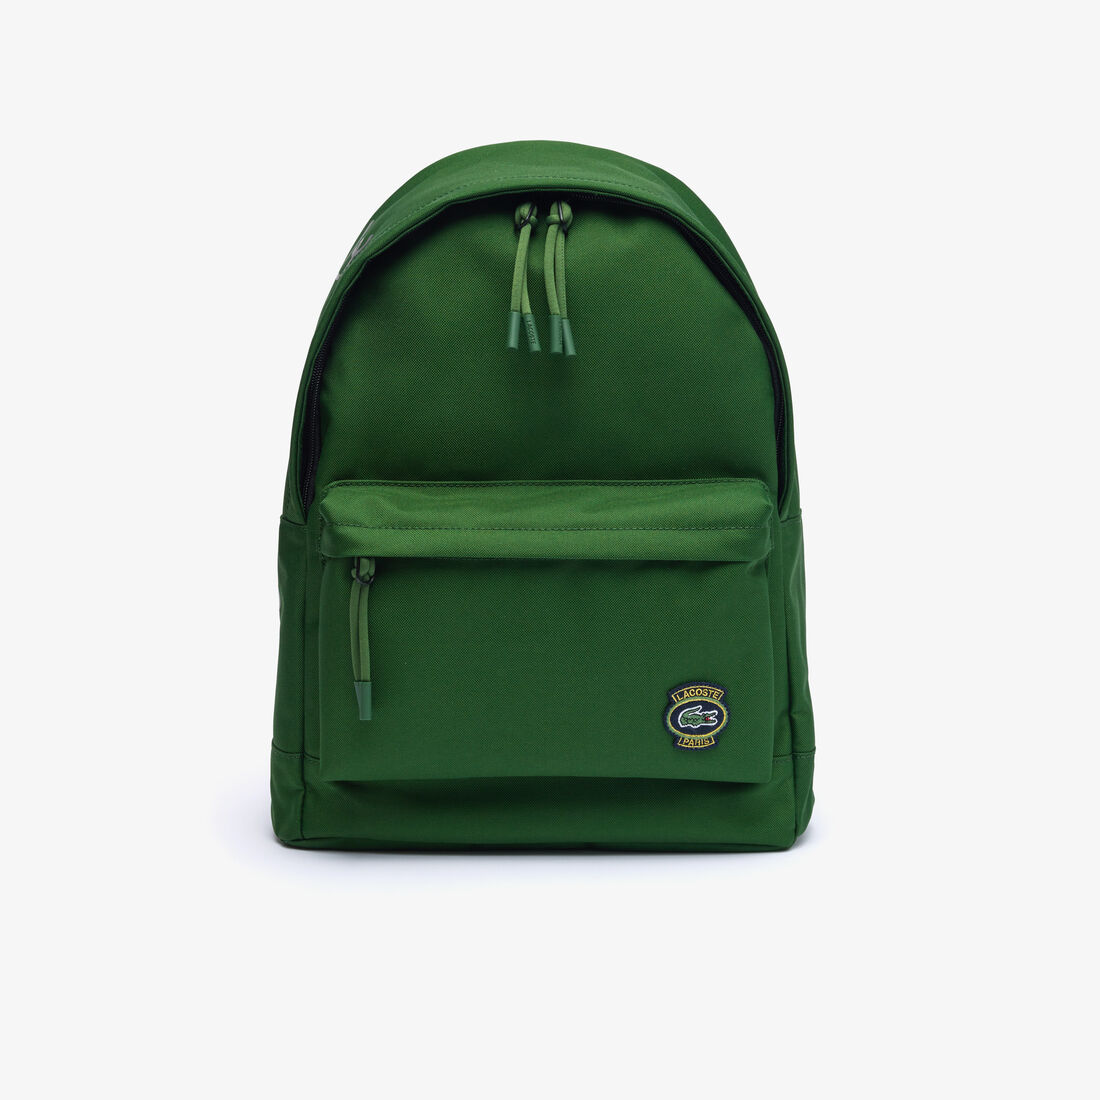 Neocroc R. Lacoste Signature Backpack - NH4615NZ-N38